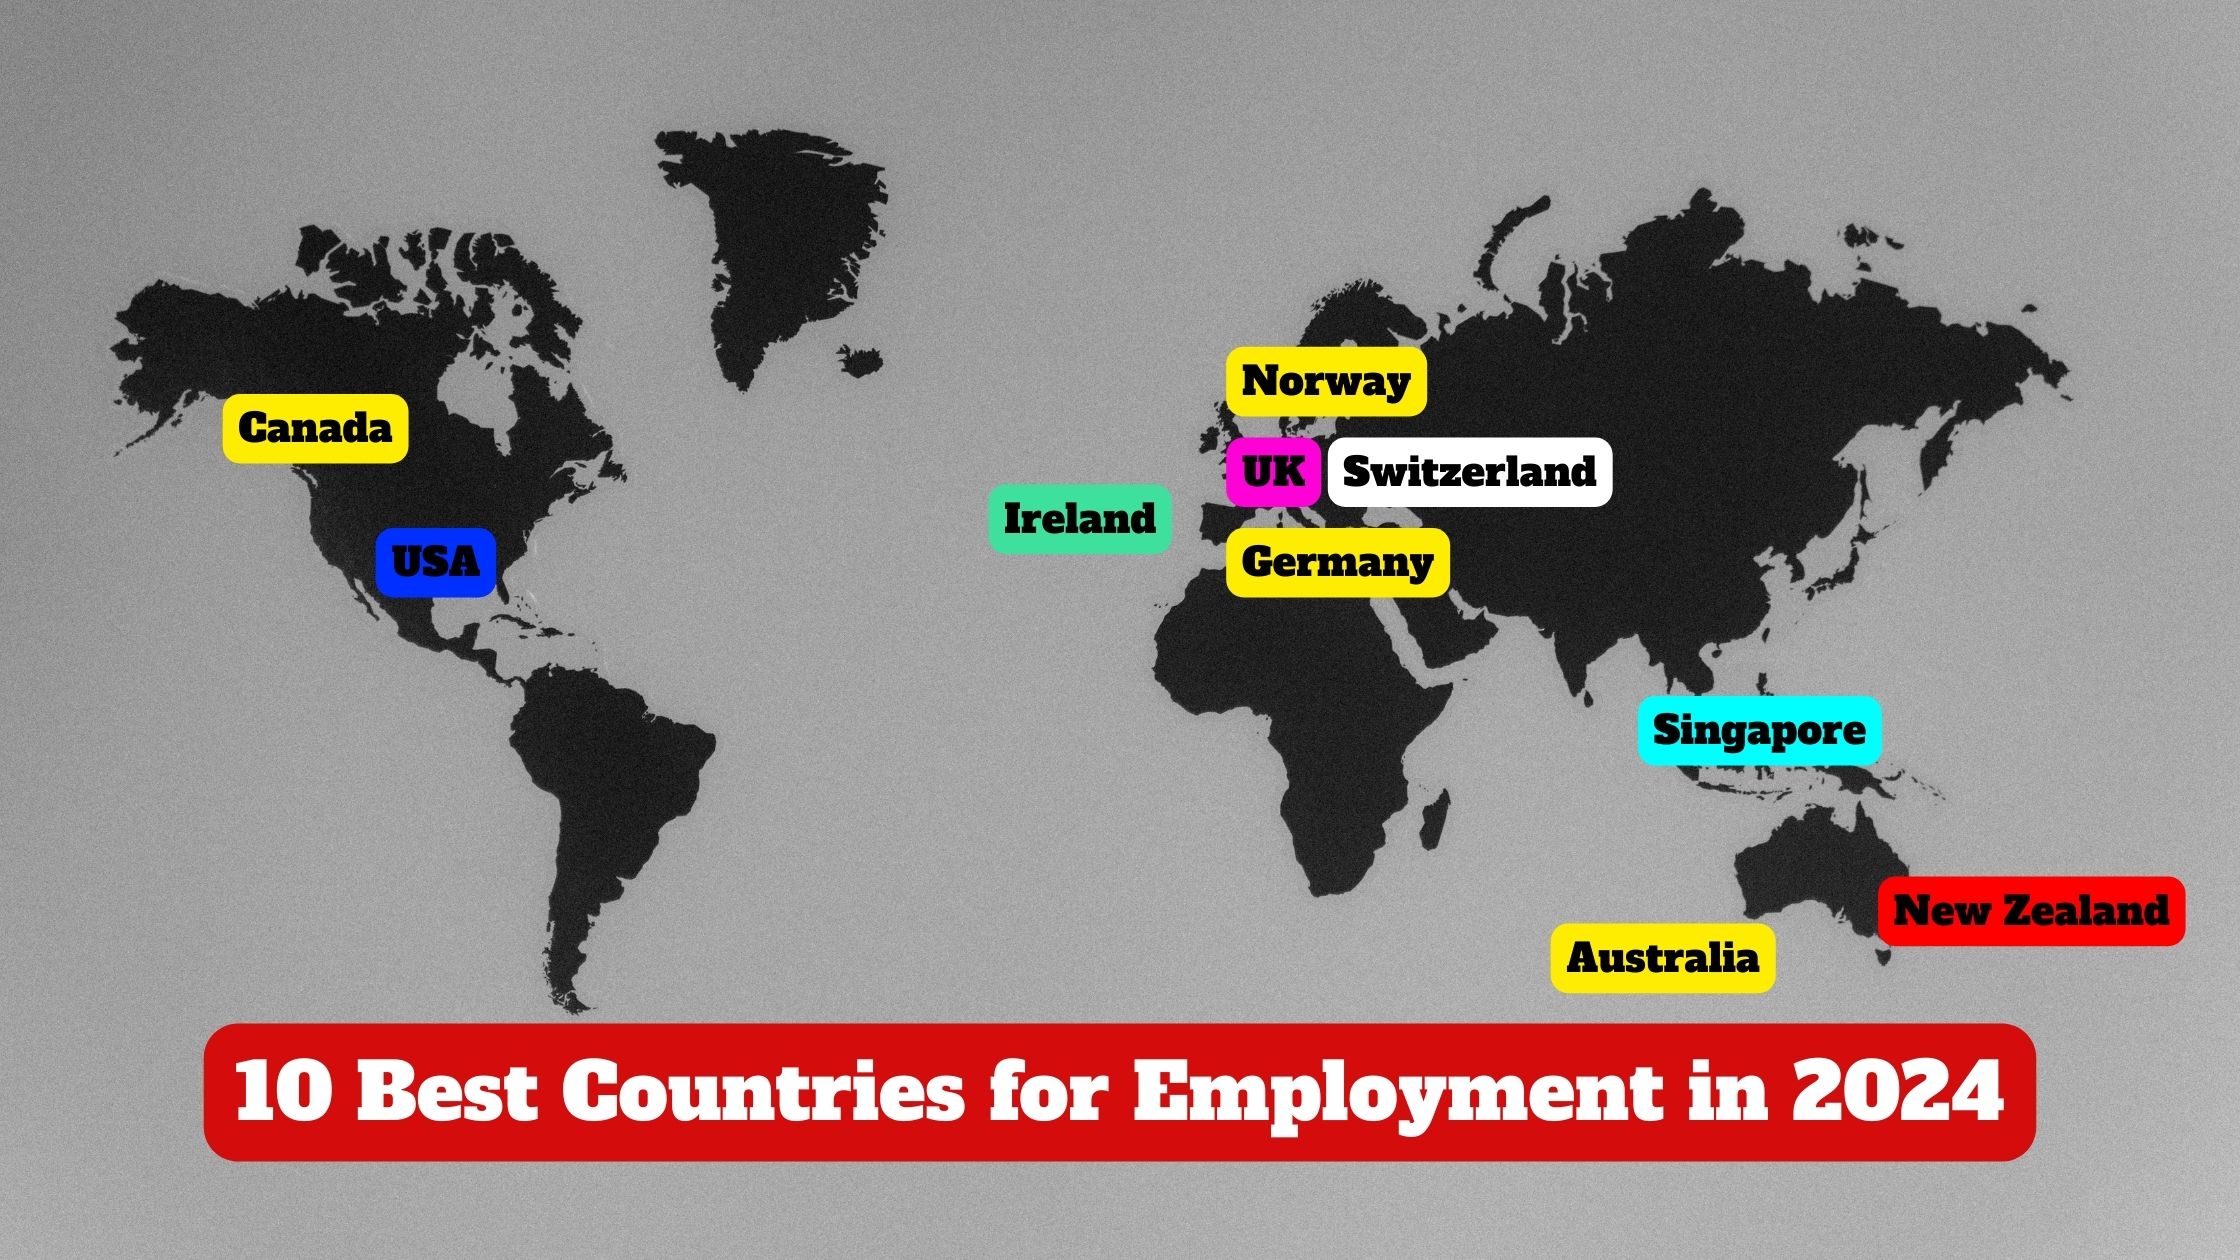 Top 10 countries for employment